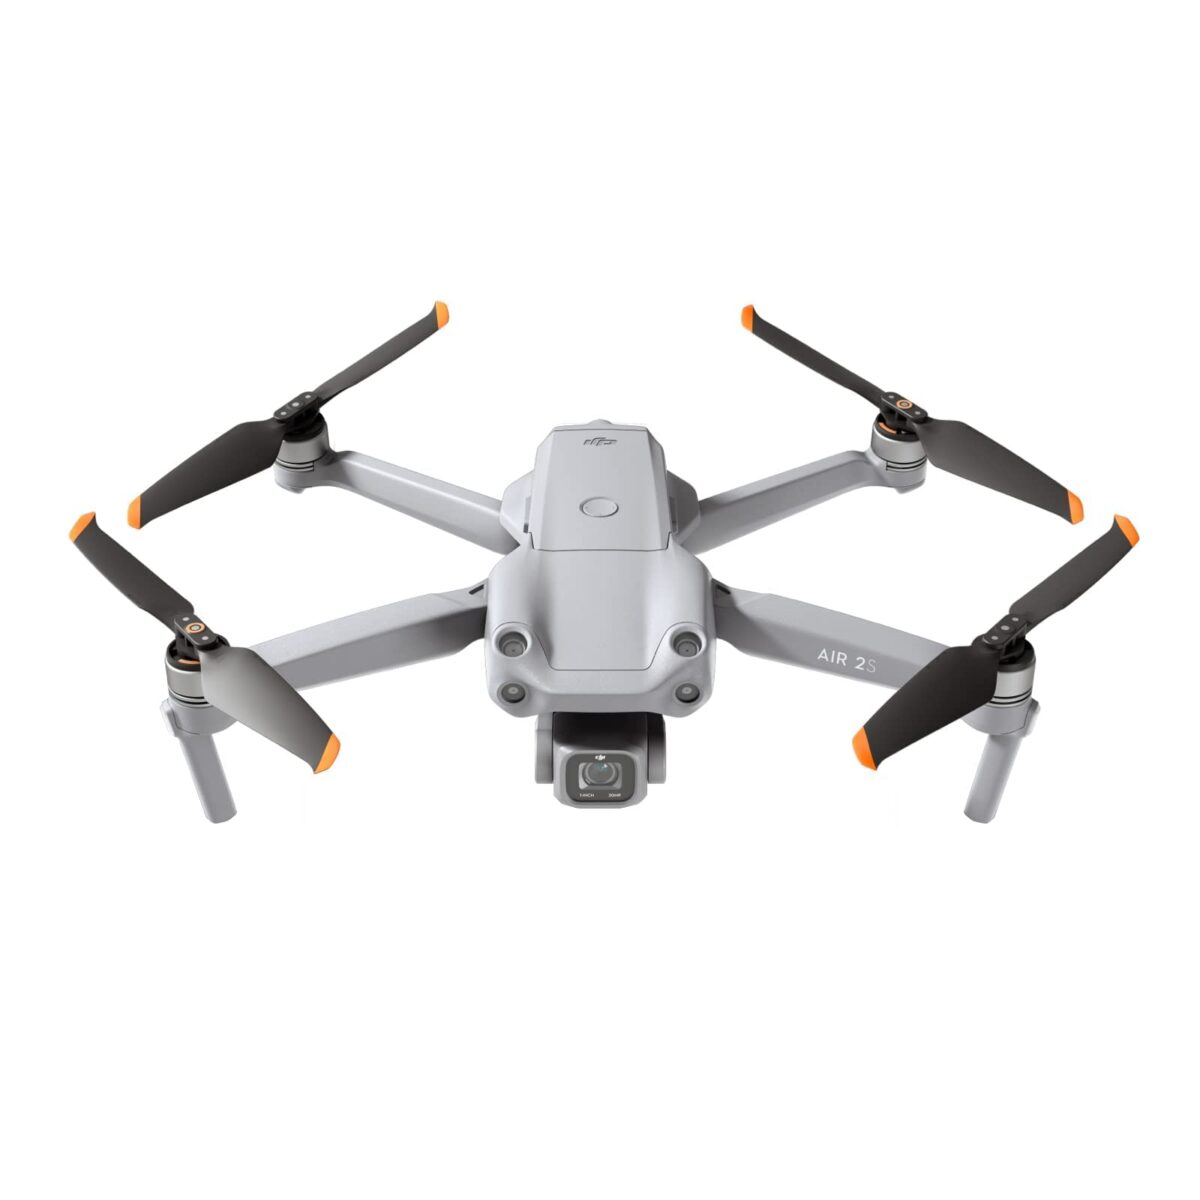 DJI Air 2S Drone Quadcopter UAV With 3-Axis